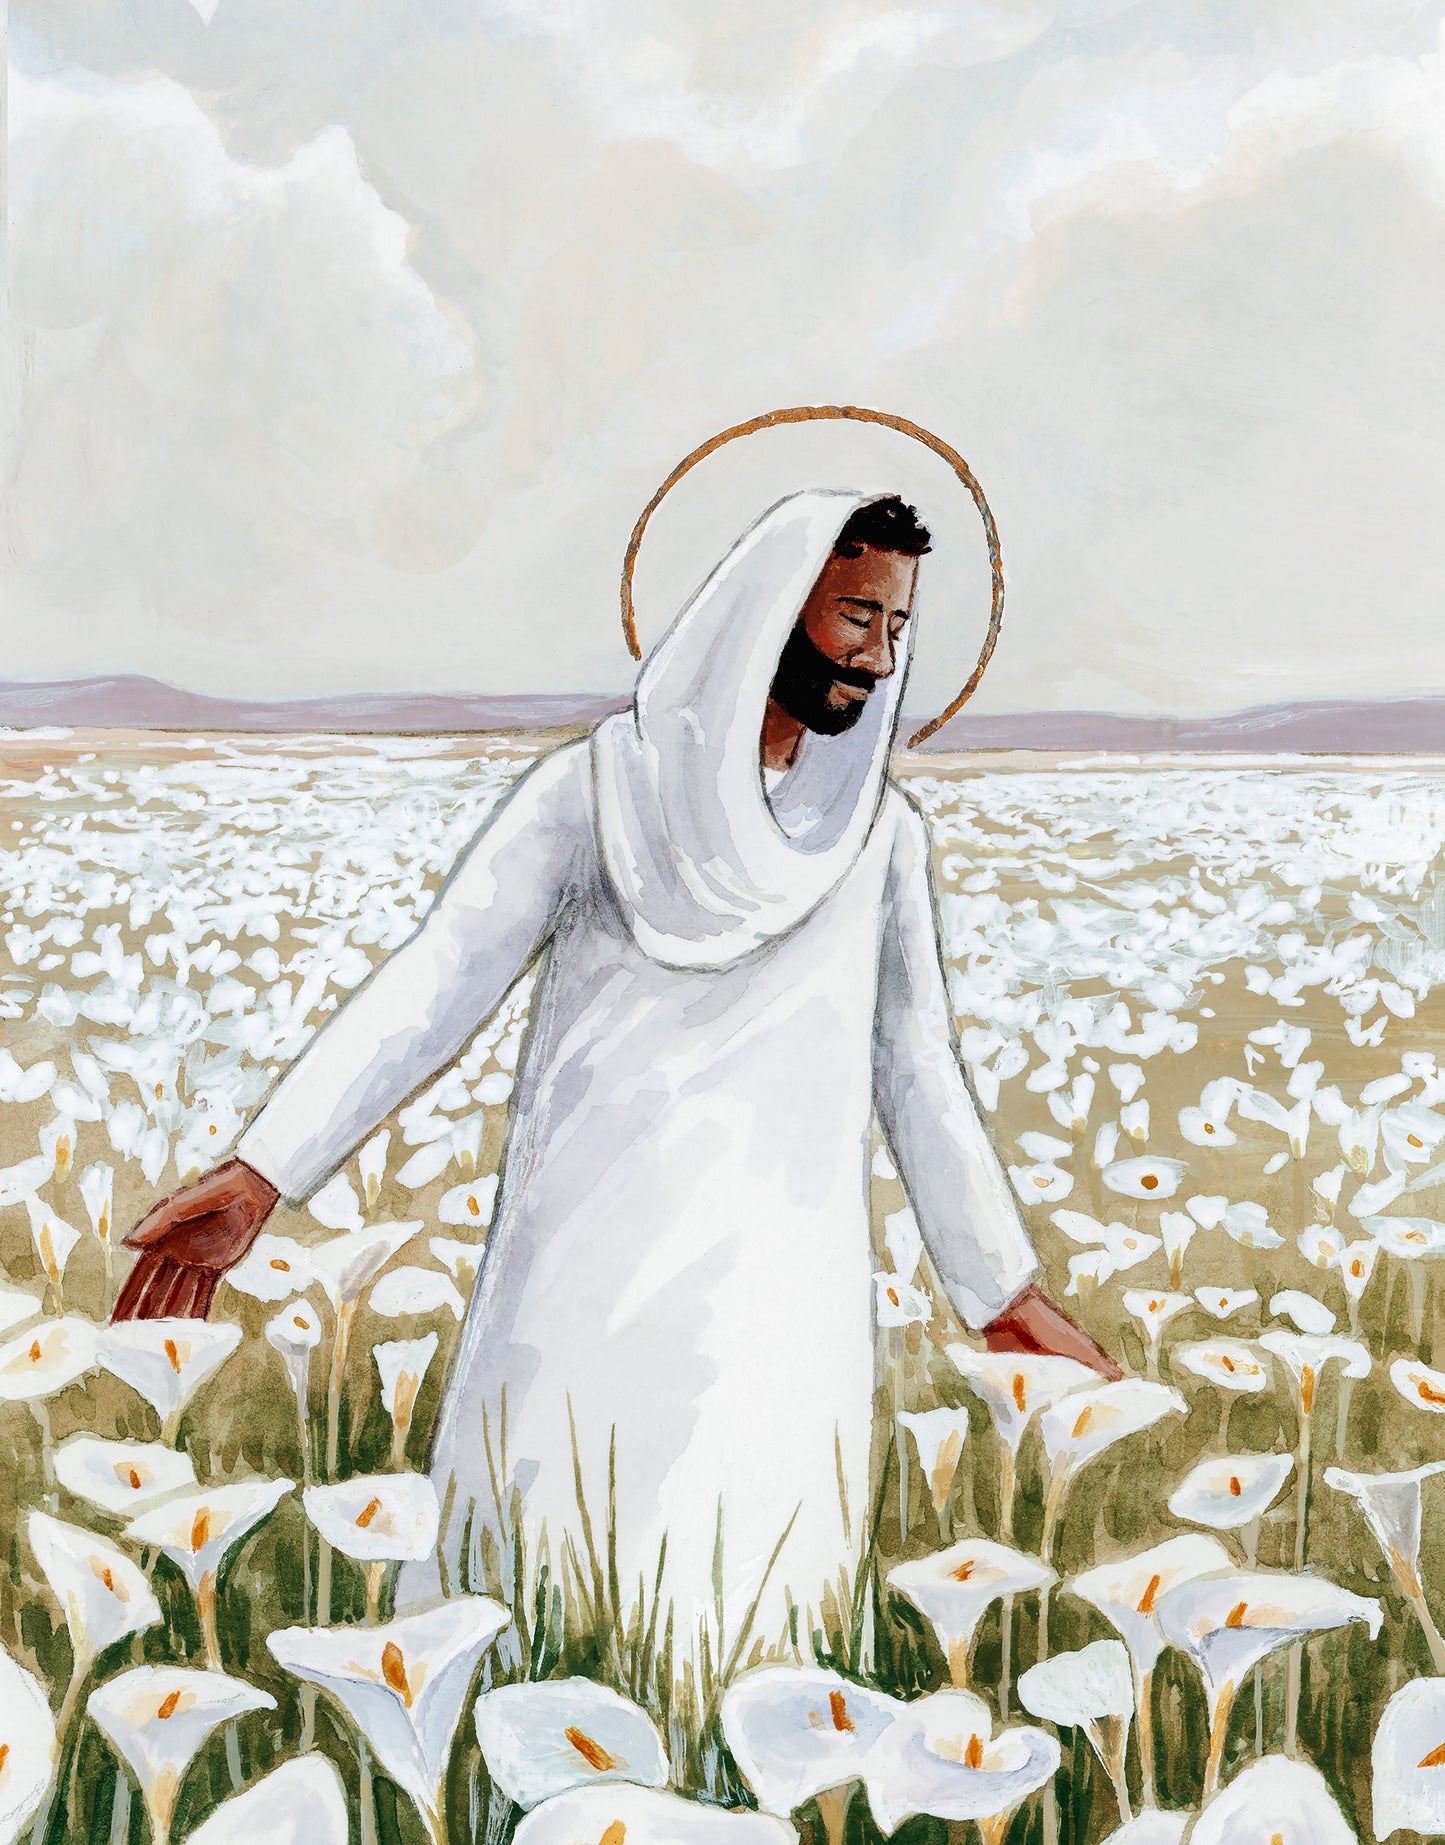 'Consider The Lilies Of The Field' Print